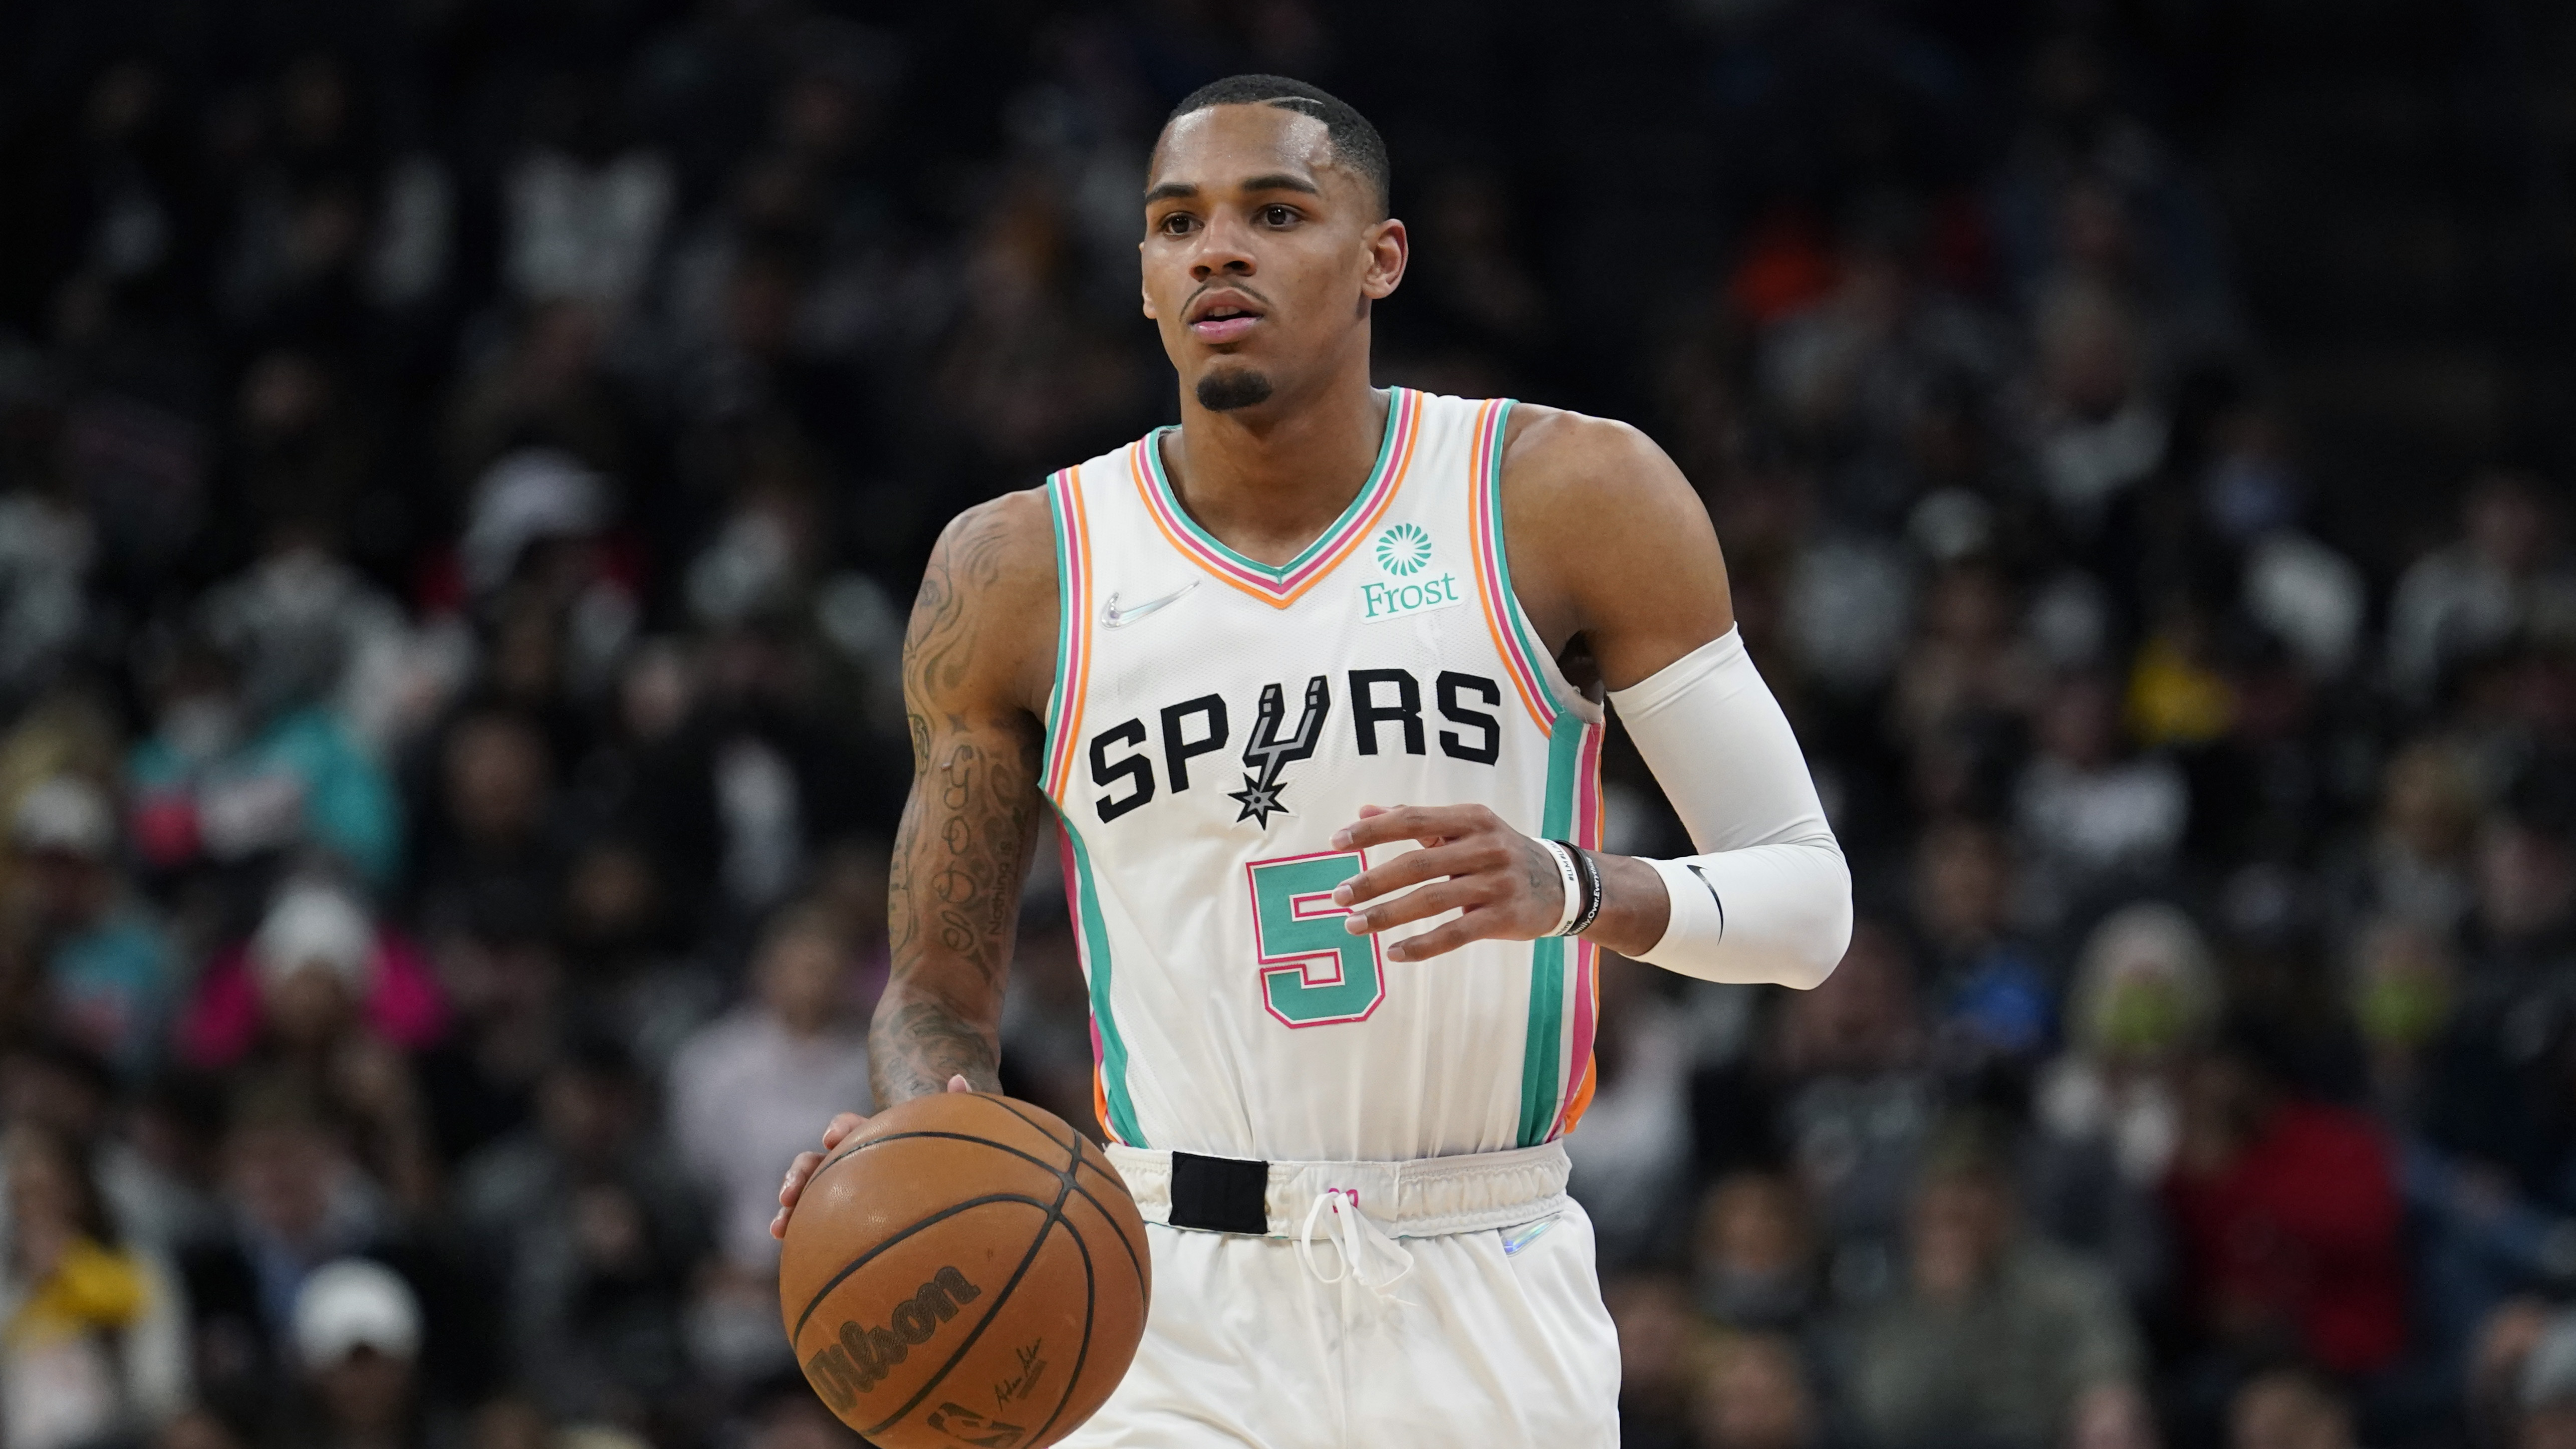 Spurs: Predicting Dejounte Murray's Average Stats in 2022